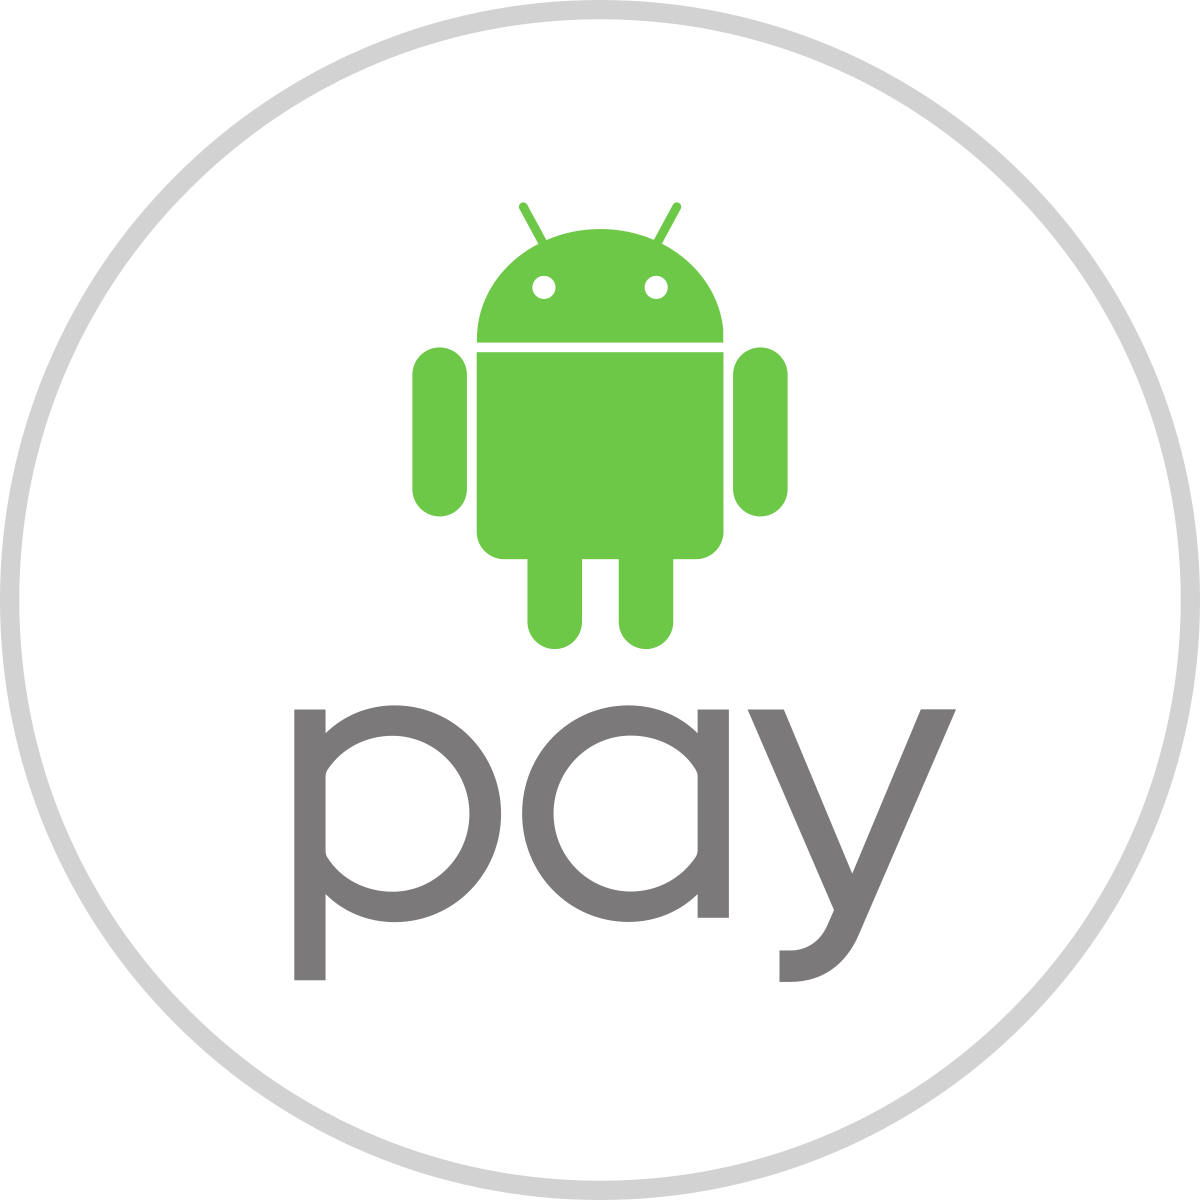 Pay Background PNG